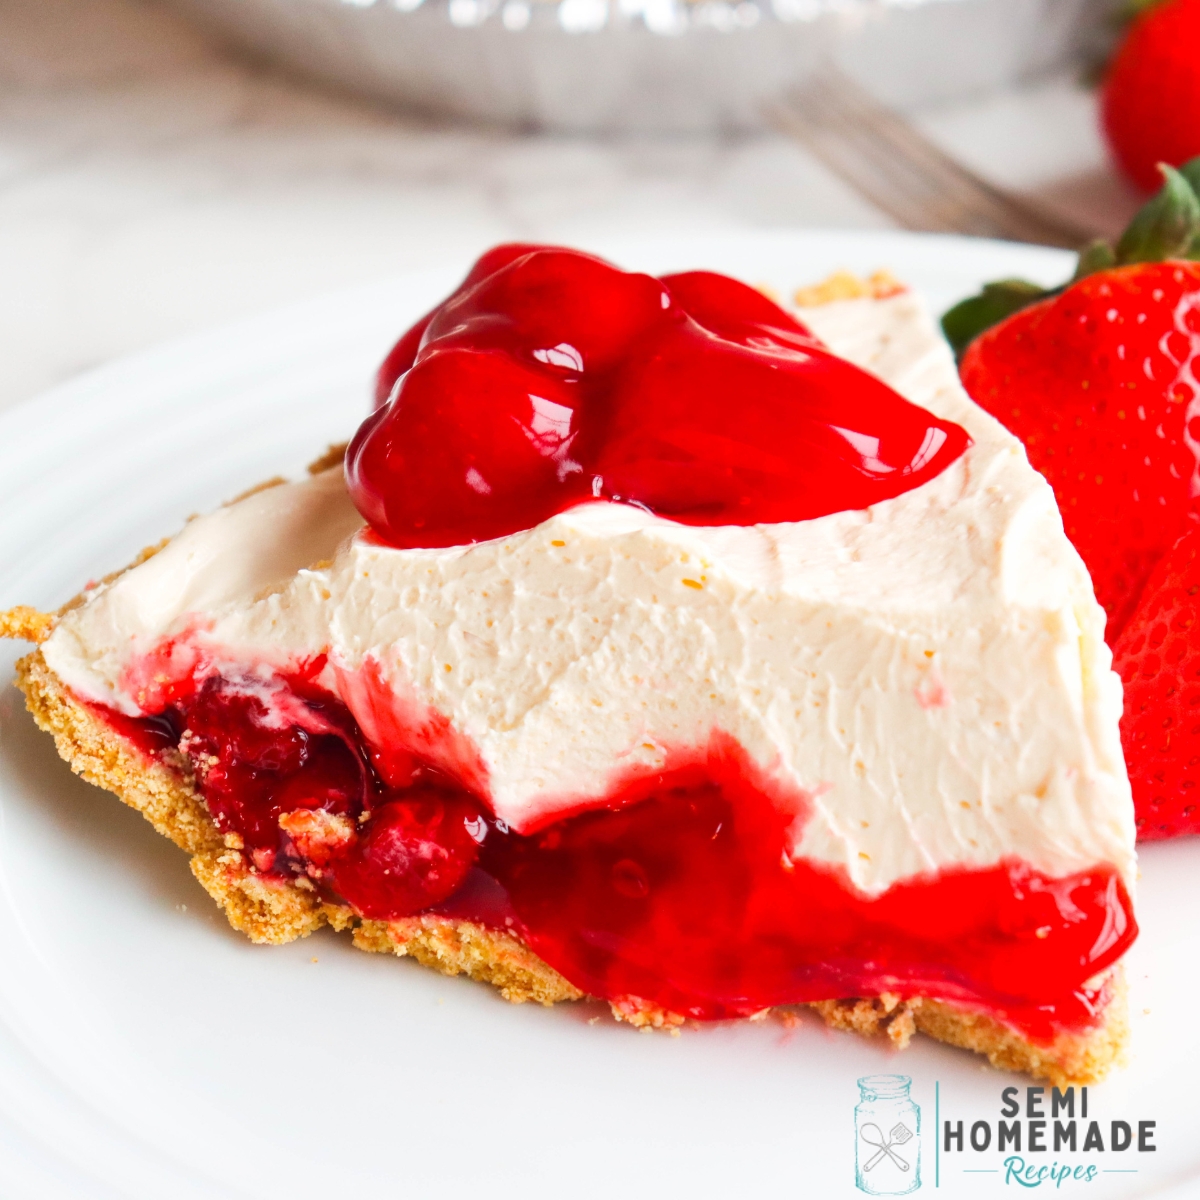 No Bake Strawberry Cheesecake Pie - This tasty, no bake cheesecake is an easy dessert with the perfect layers of strawberry pie filling and creamy no bake cheesecake! Top it the slices with strawberry pie filling or whipped cream!